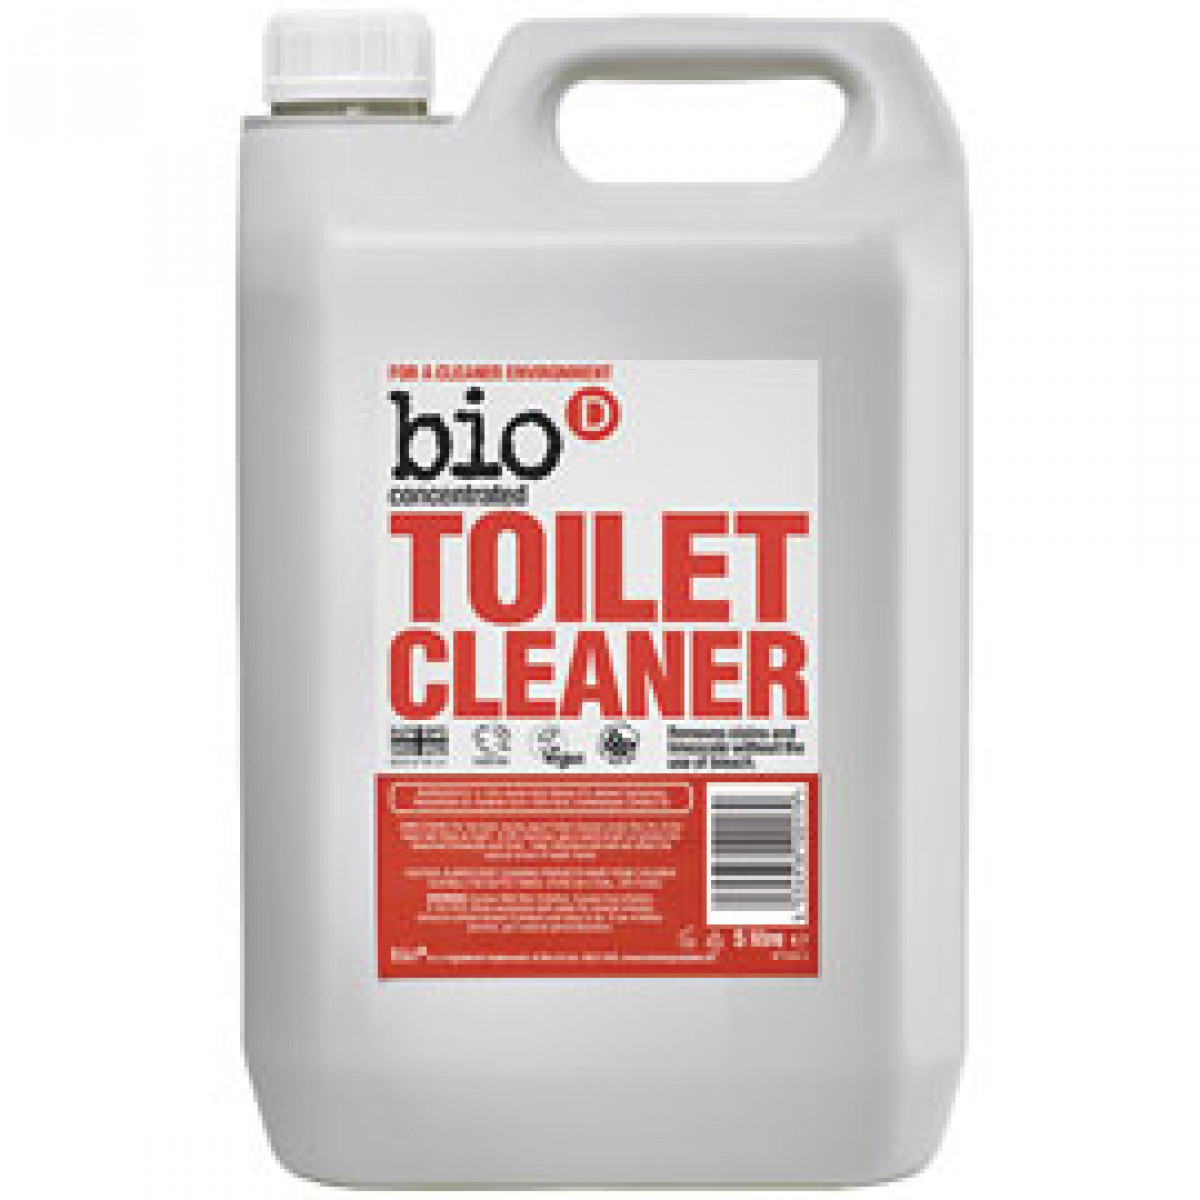 Product picture for Toilet Cleaner 5ltr